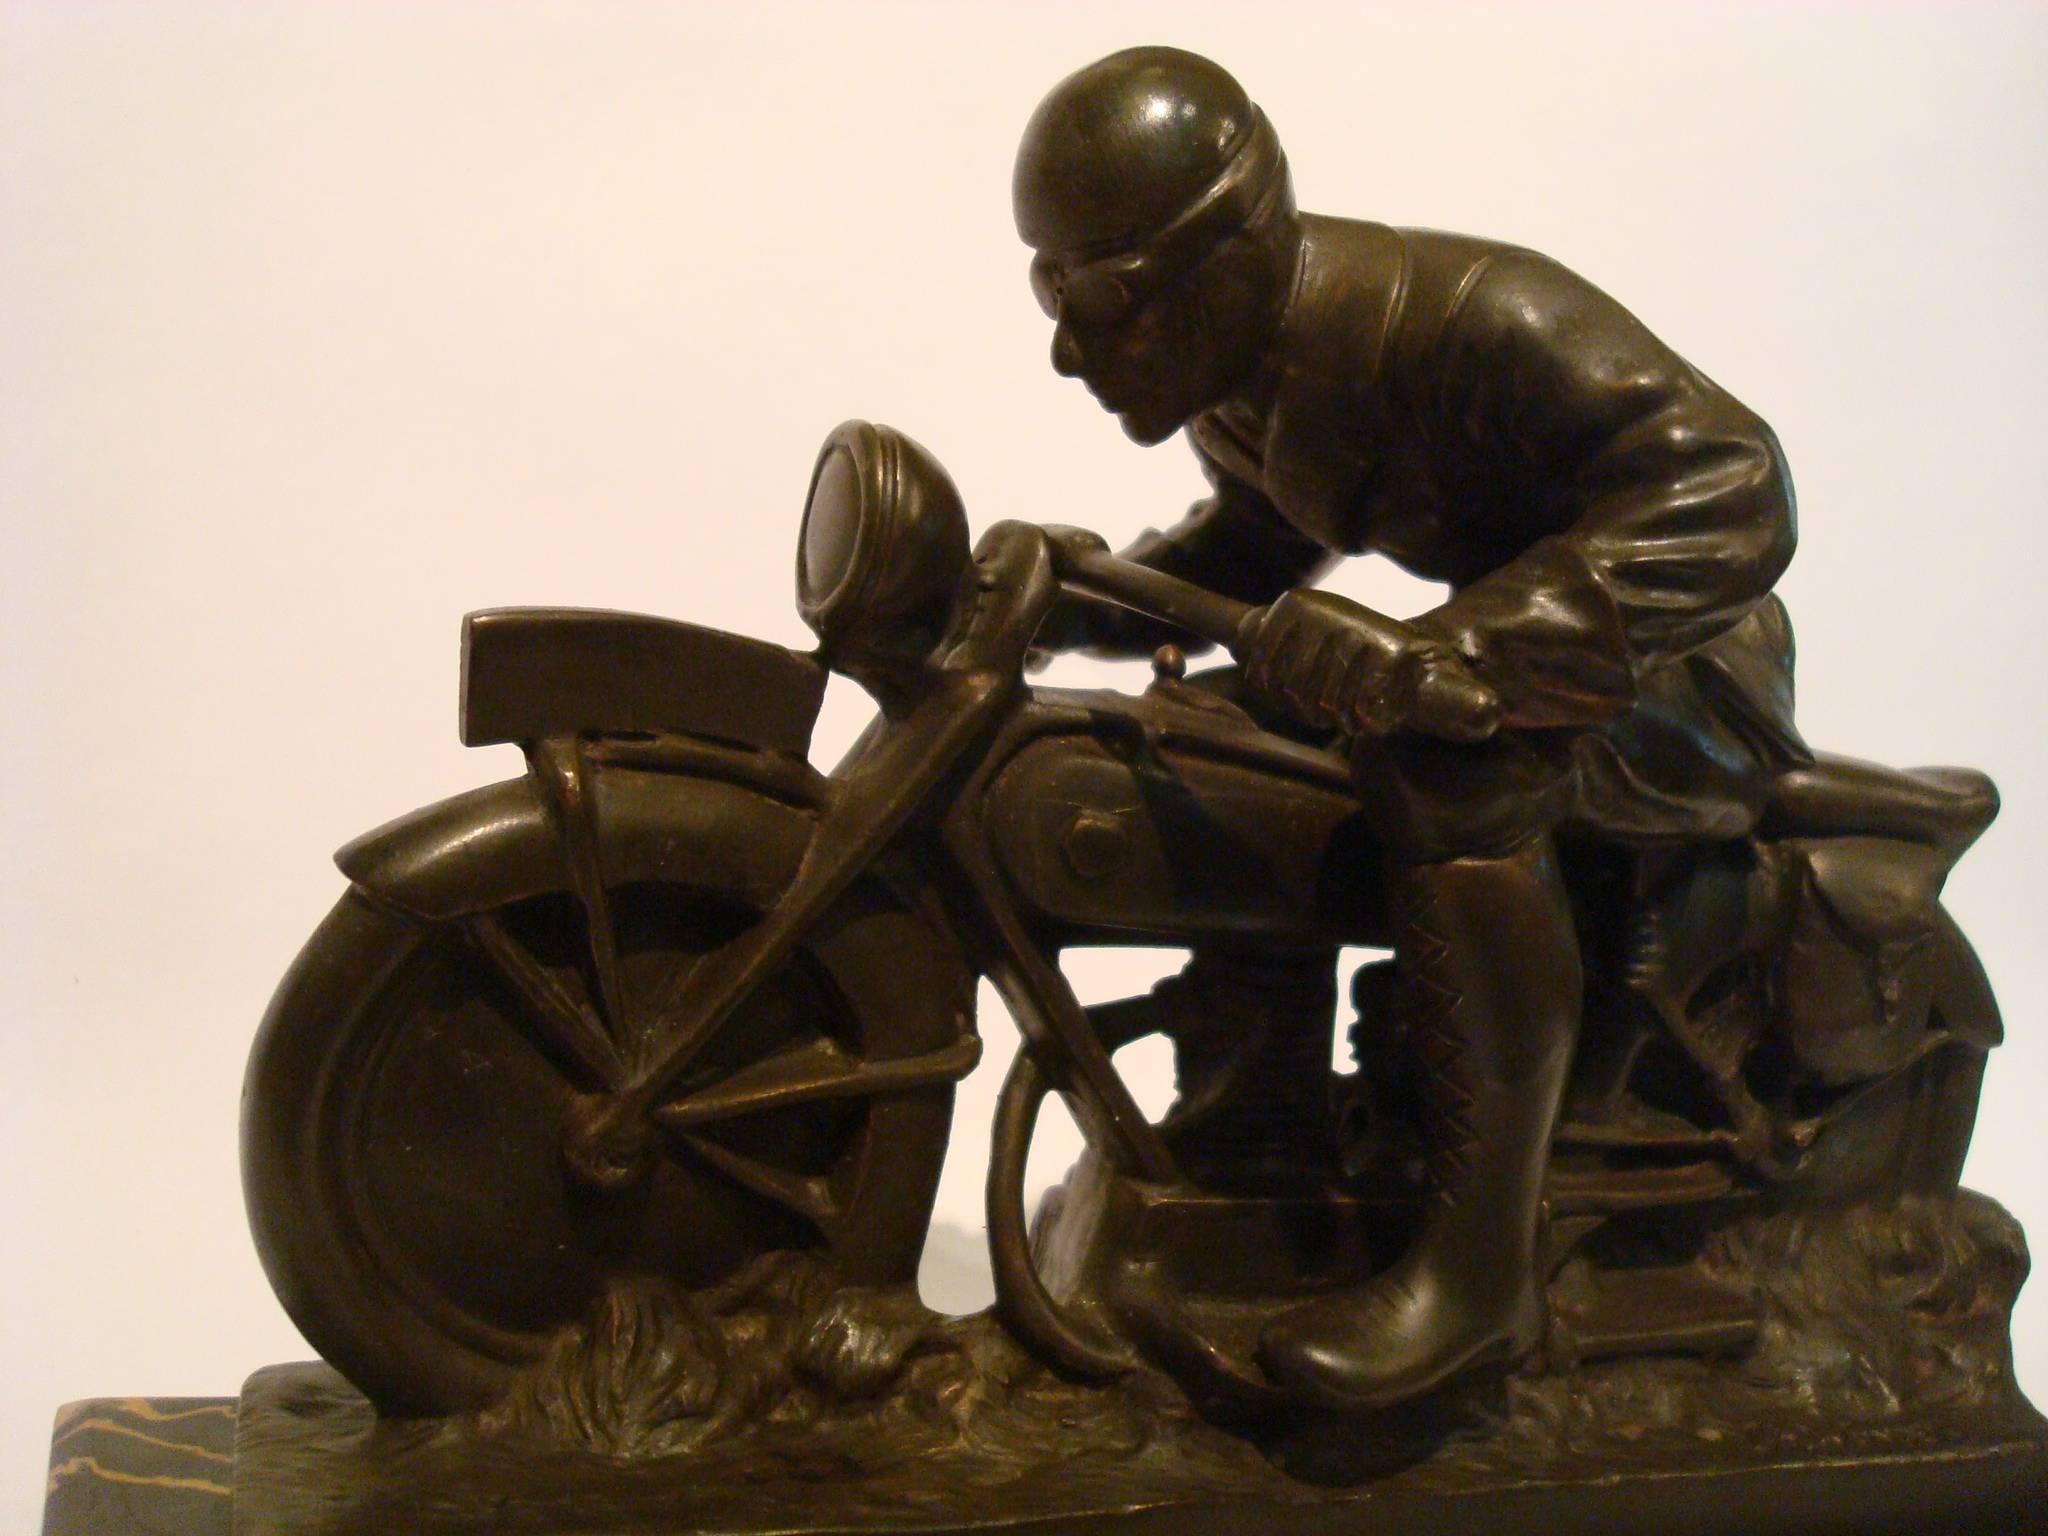 German Motorcycle Bronze with Driver Desk Piece For Sale